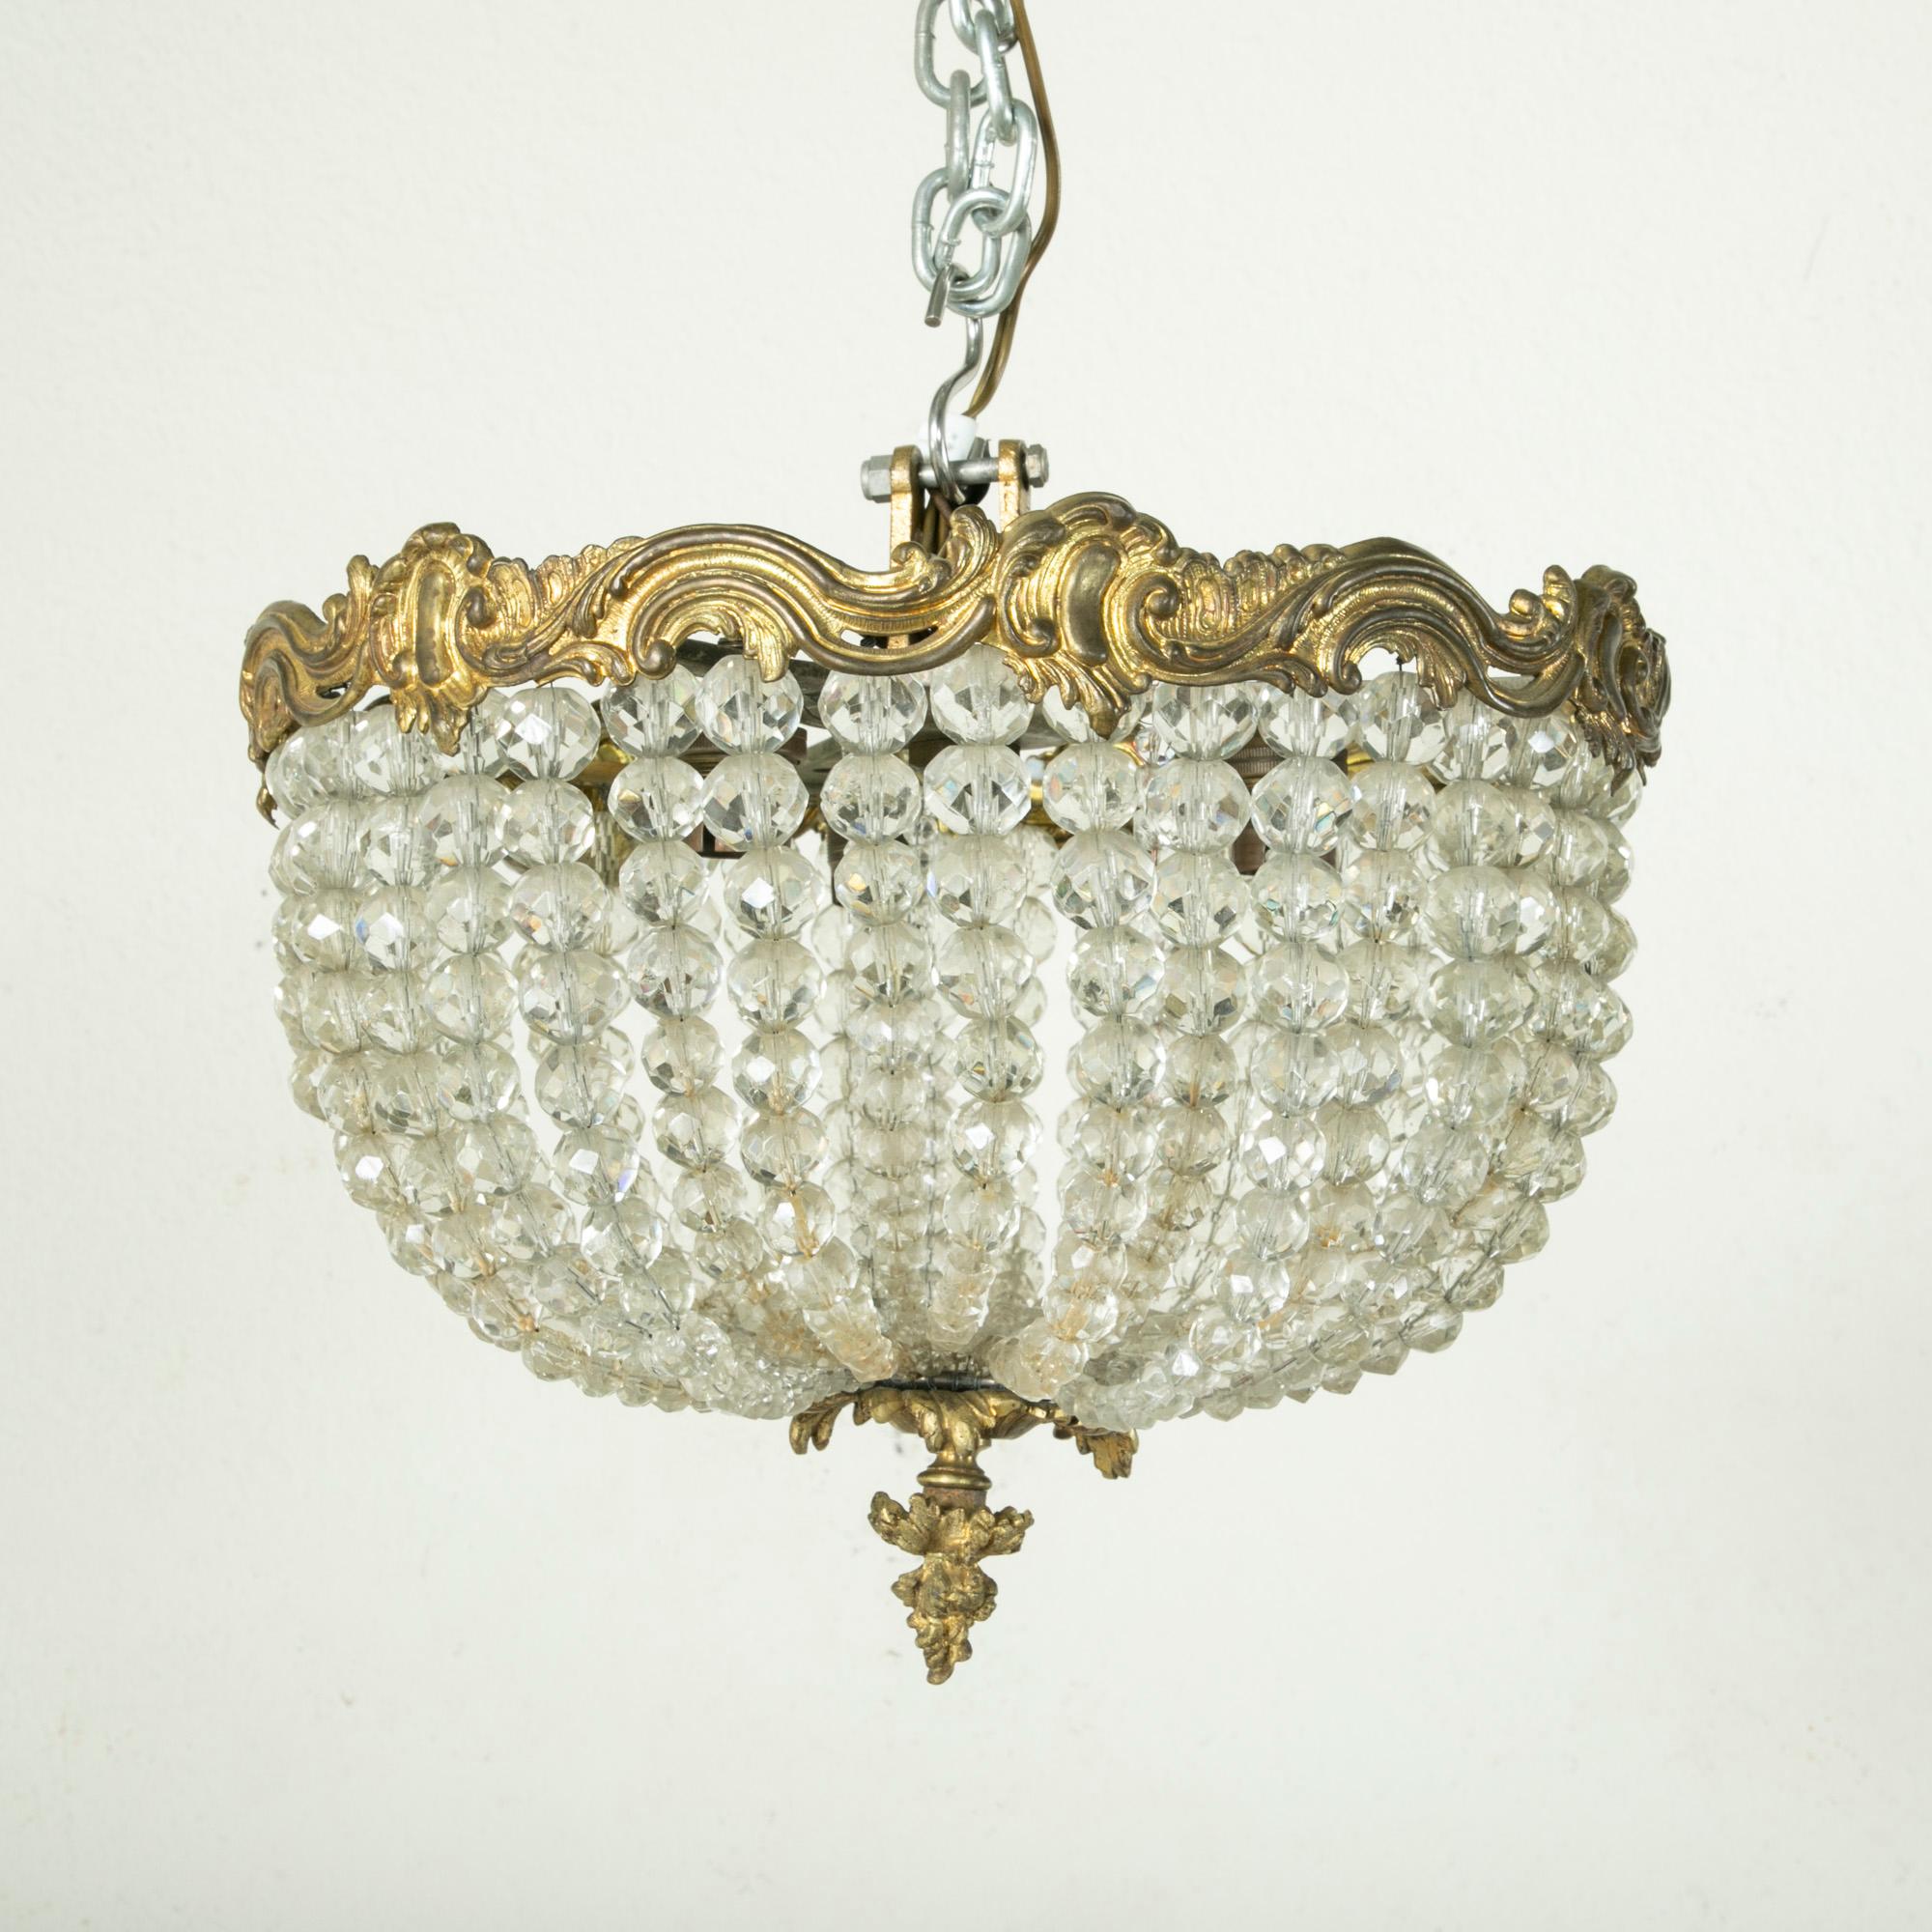 This early twentieth century French flush mount chandelier features an upper bronze ring of scrolling leaves. Multi-faceted strings of crystal beads drape to meet at a lower finial. An ideal chandelier for a powder bath or small entryway. Wired to